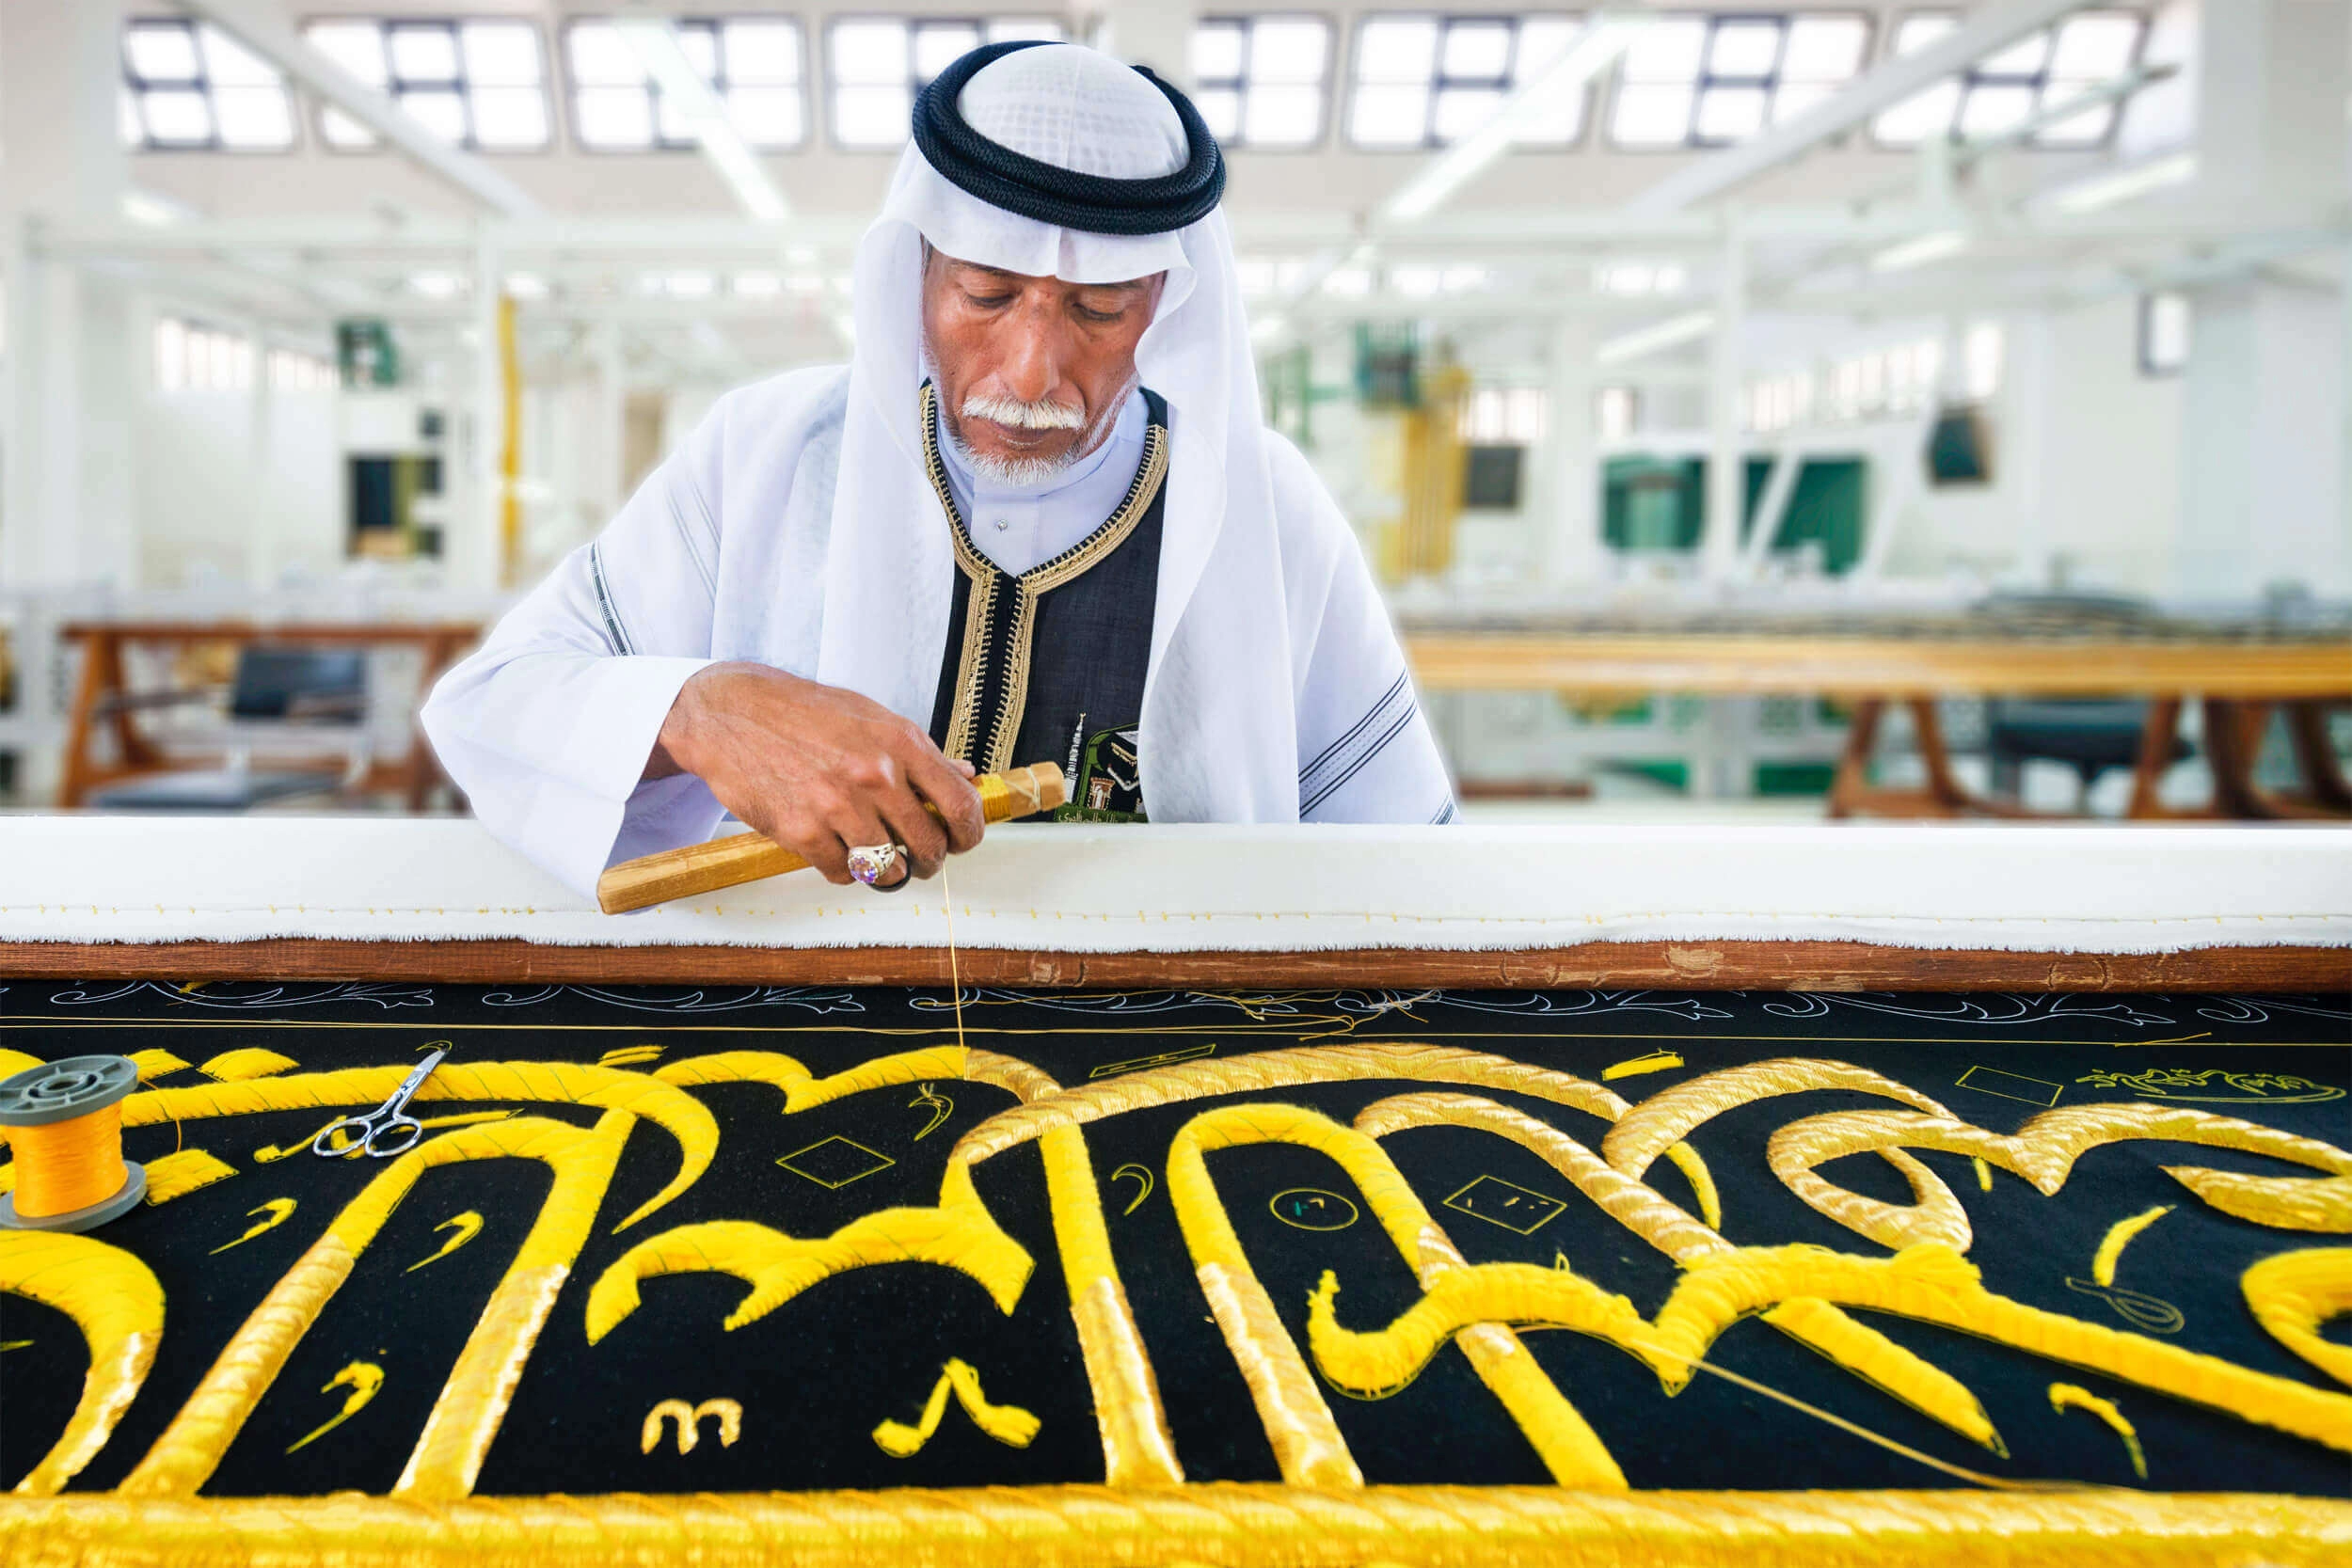 MANUFACTURING OF THE KISWAH